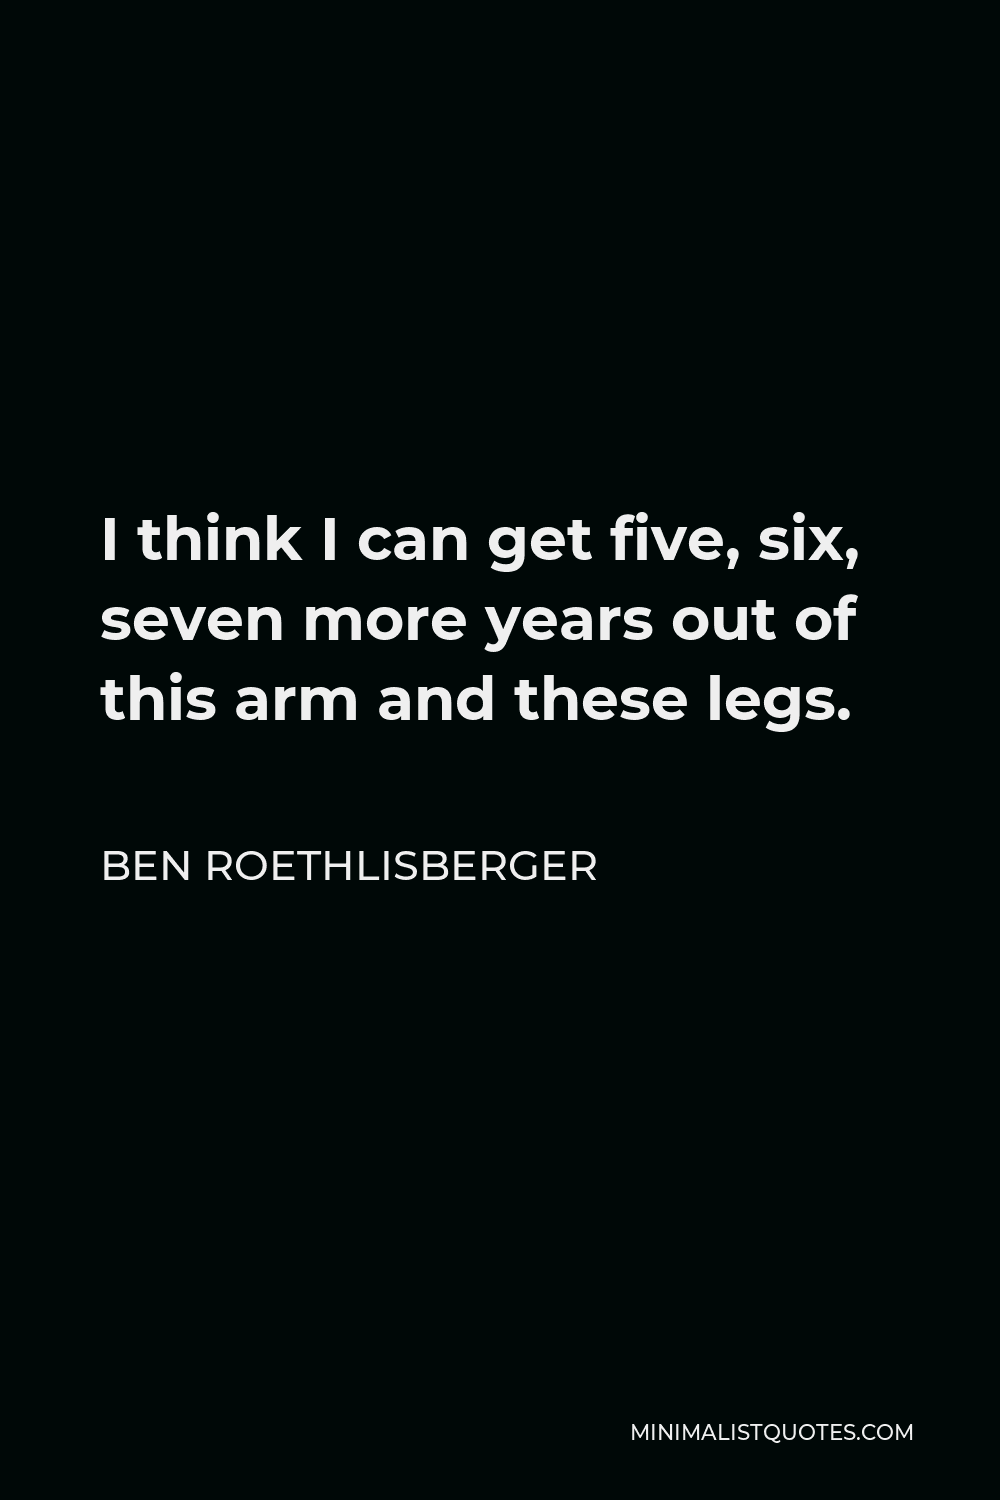 Ben Roethlisberger Quote - I think I can get five, six, seven more years out of this arm and these legs.